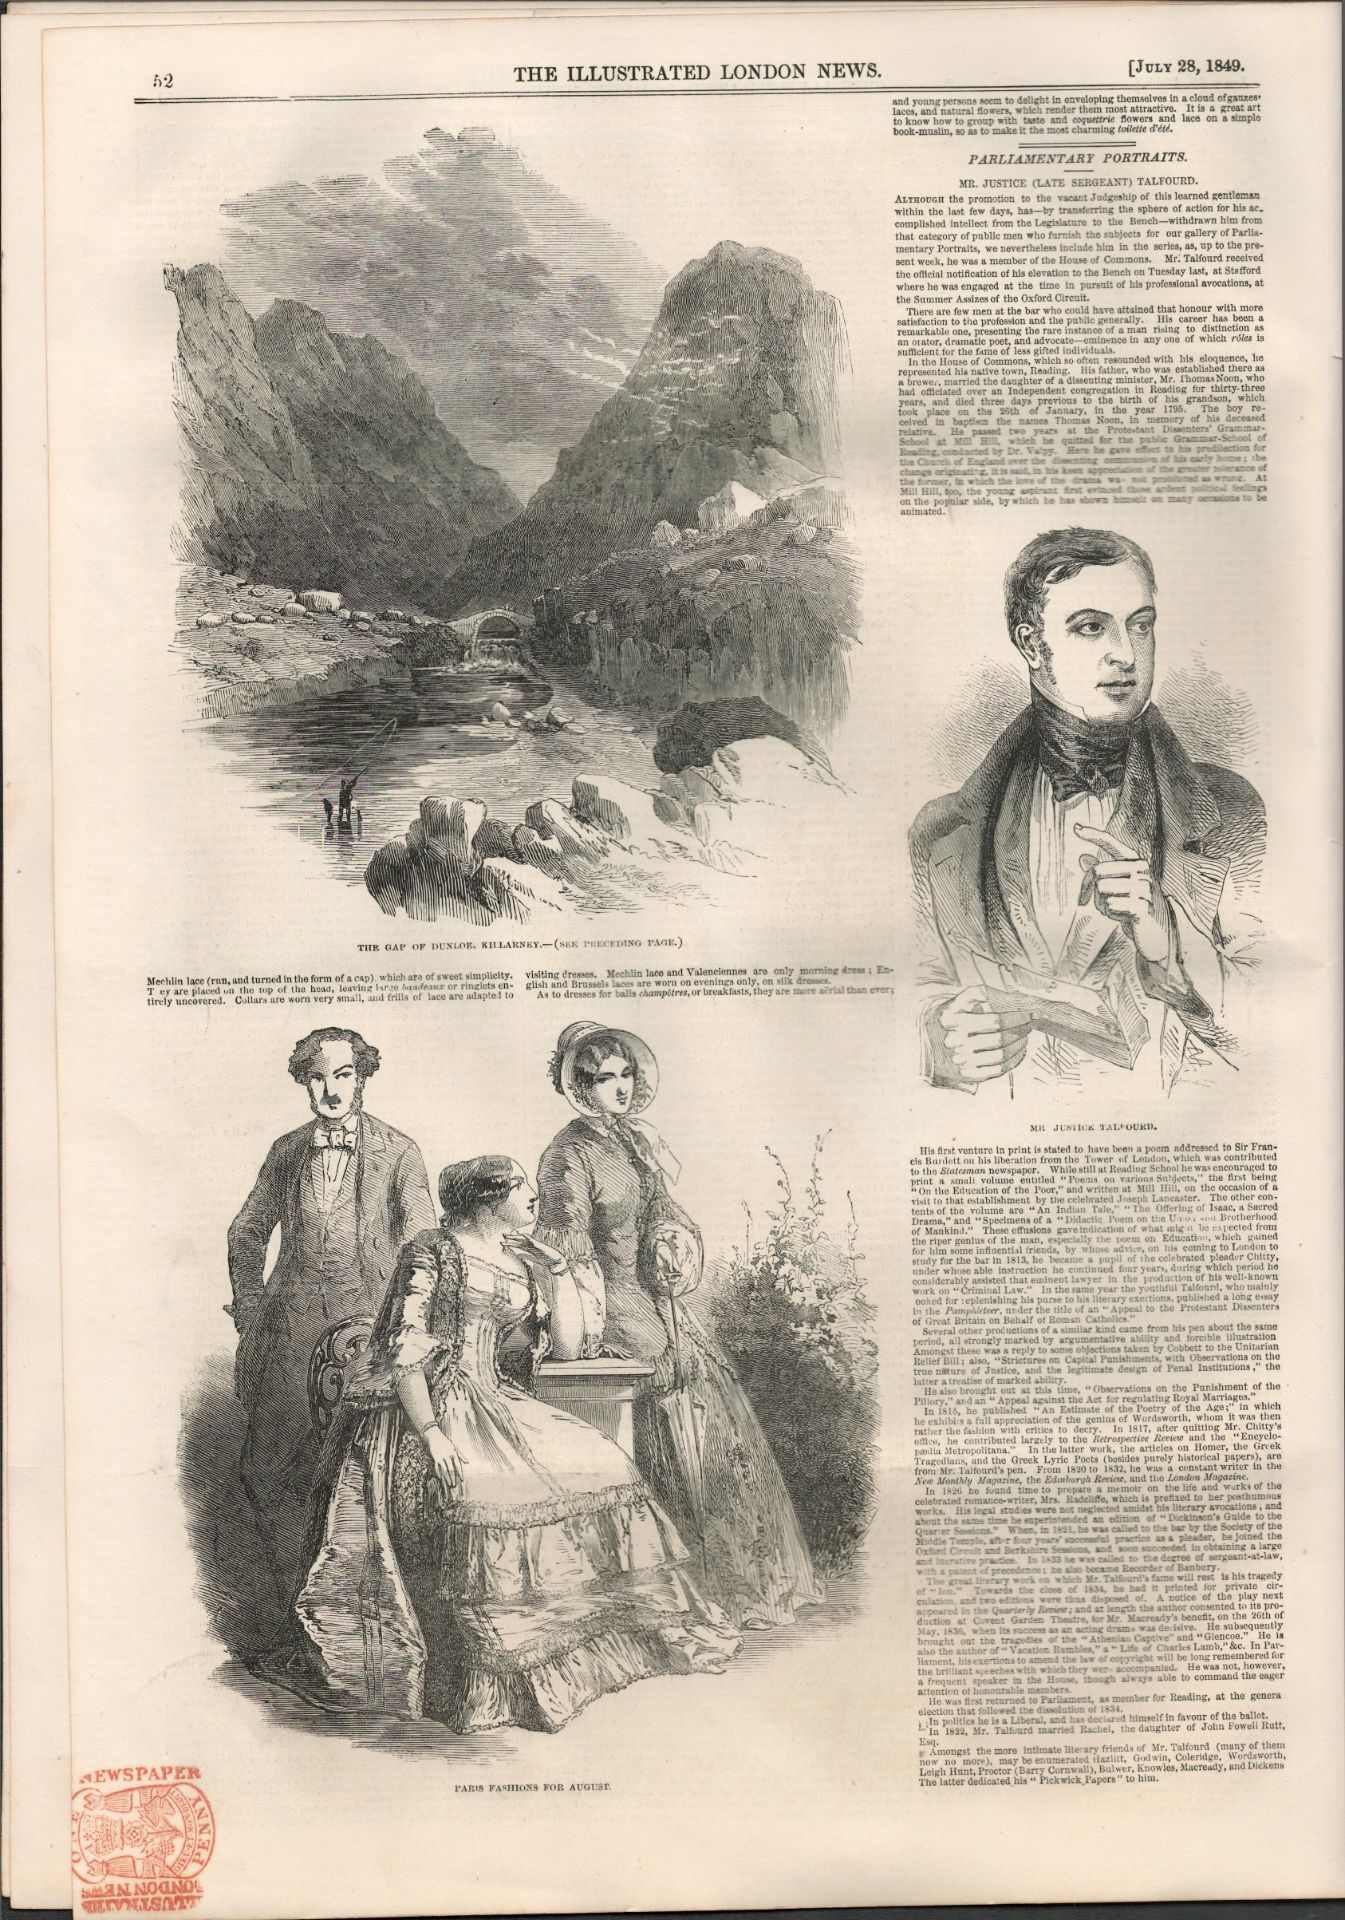 Antique 1849 London Newspaper A Day In A Irish Town Killarney - Image 7 of 8